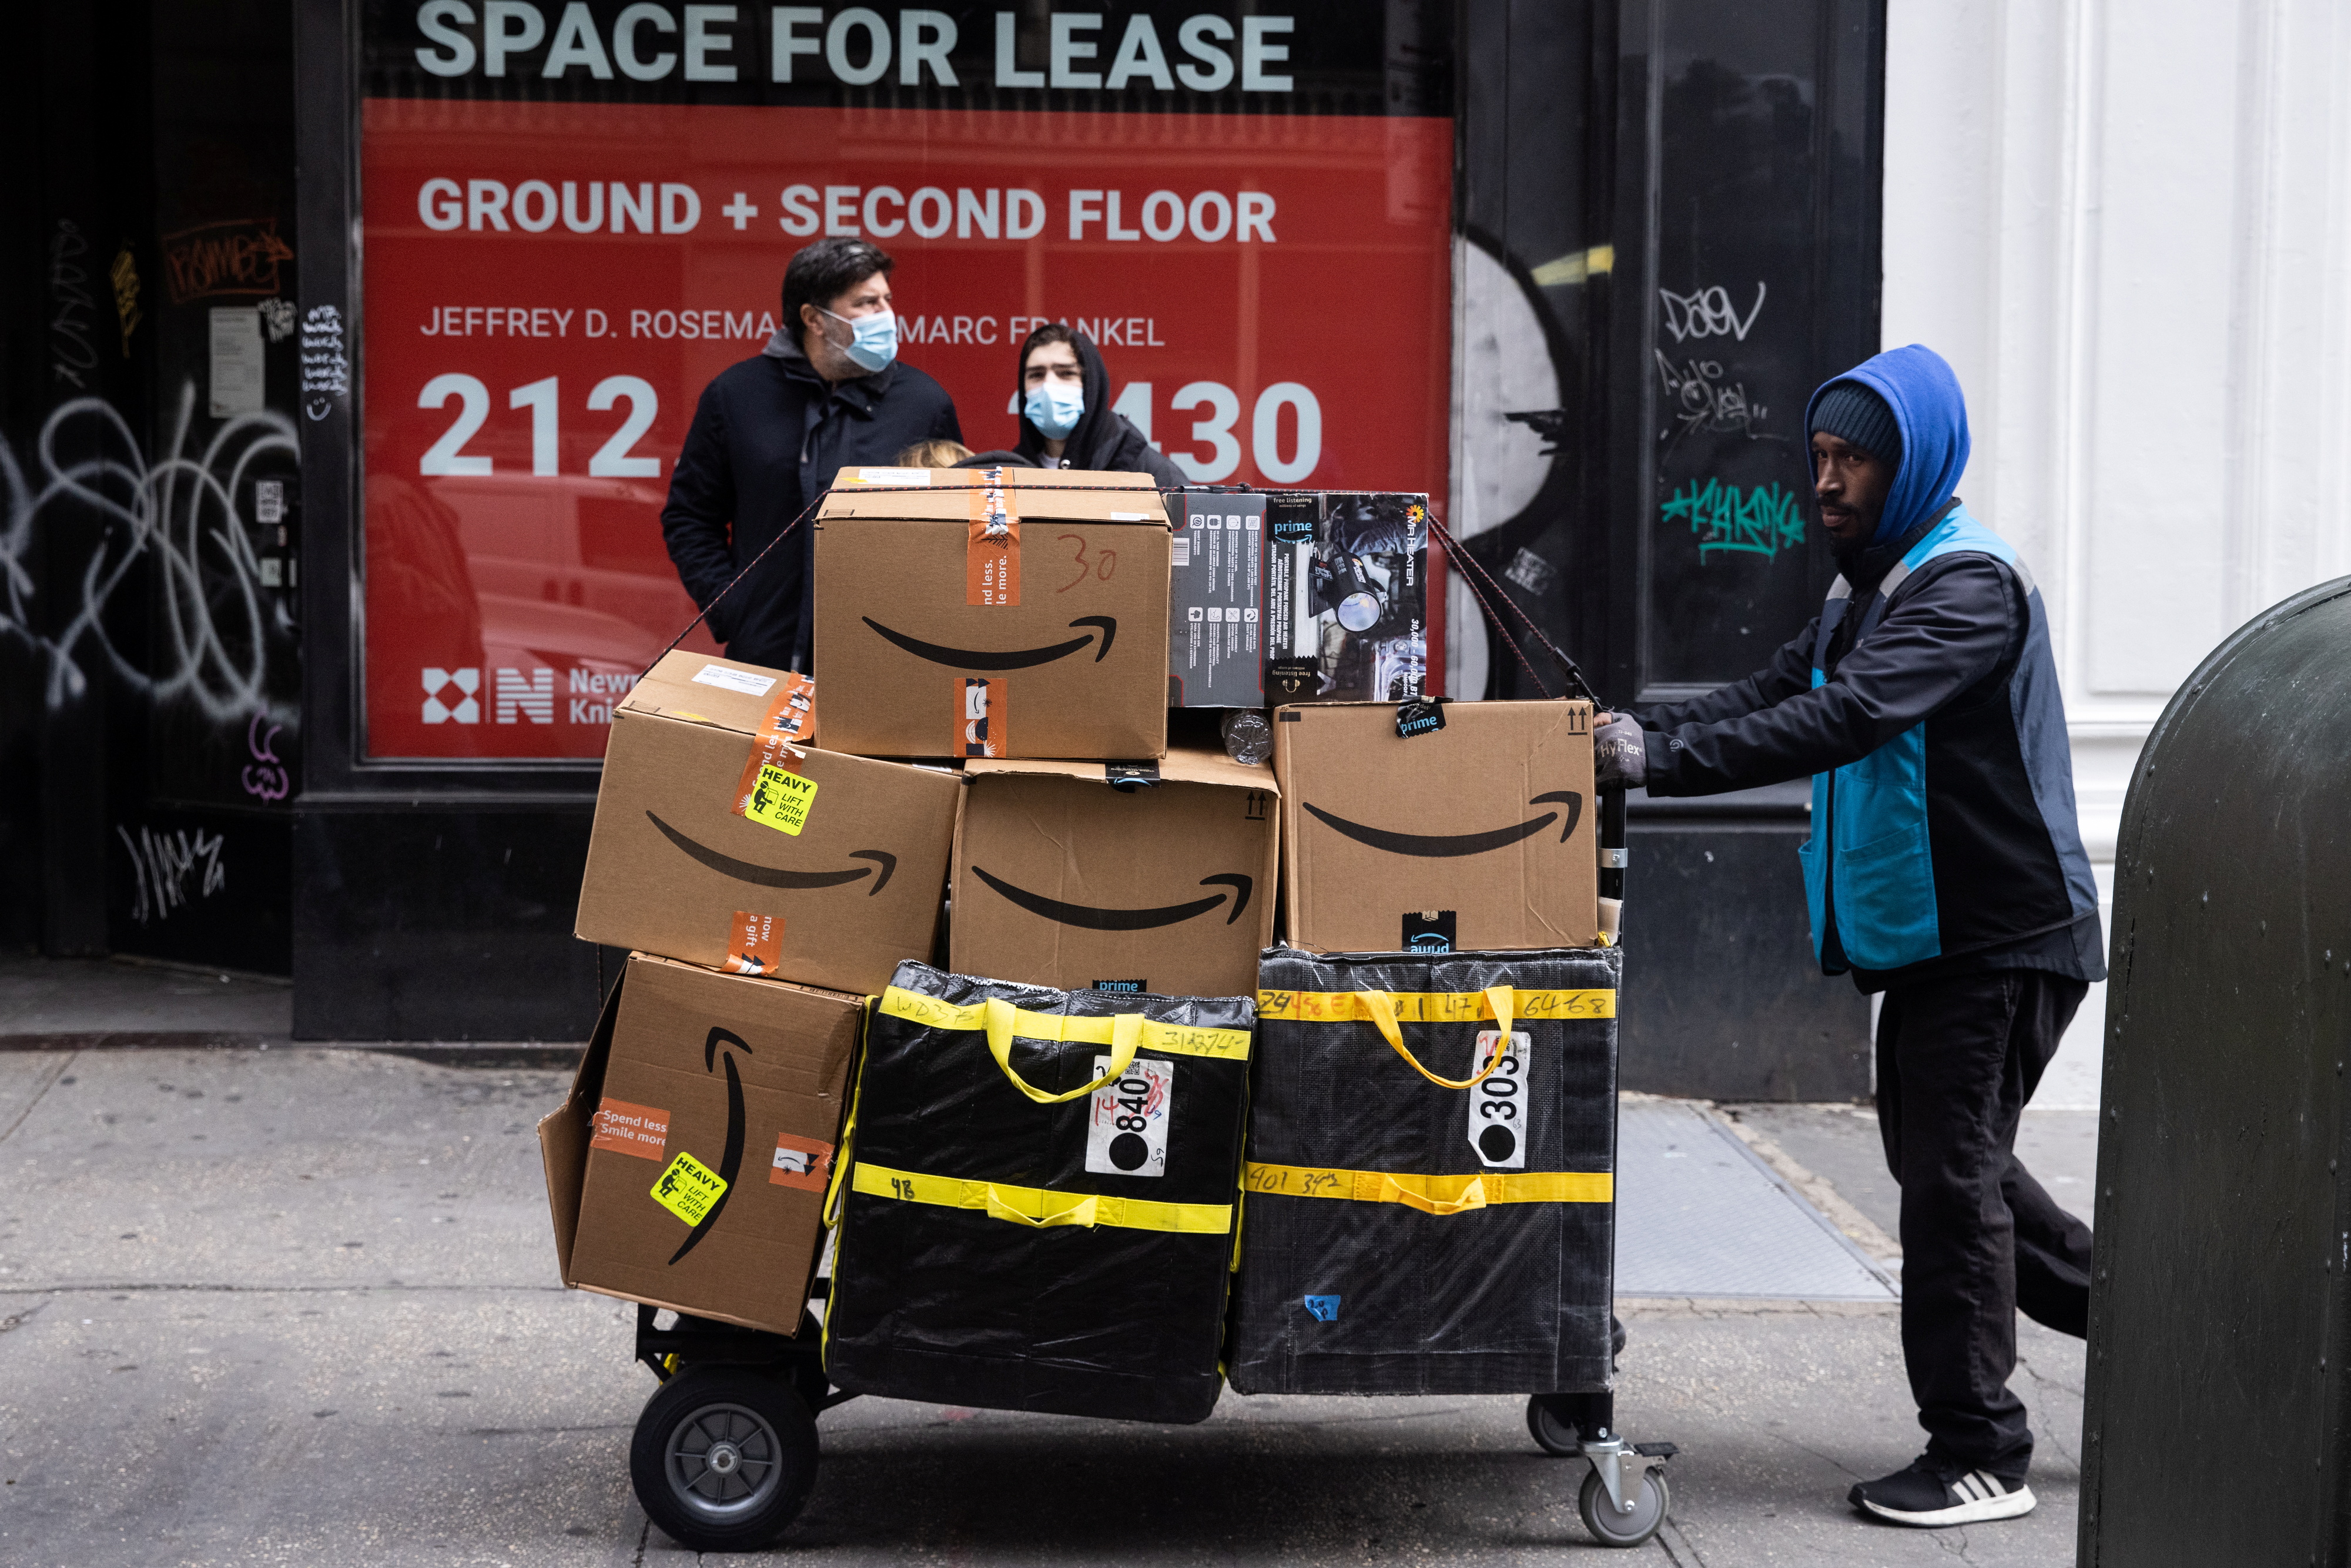 A delivery person pushes a cart full of Amazon boxes during Black Friday sales in the Manhattan borough of New York City, New York, U.S., November 26, 2021. REUTERS/Jeenah Moon